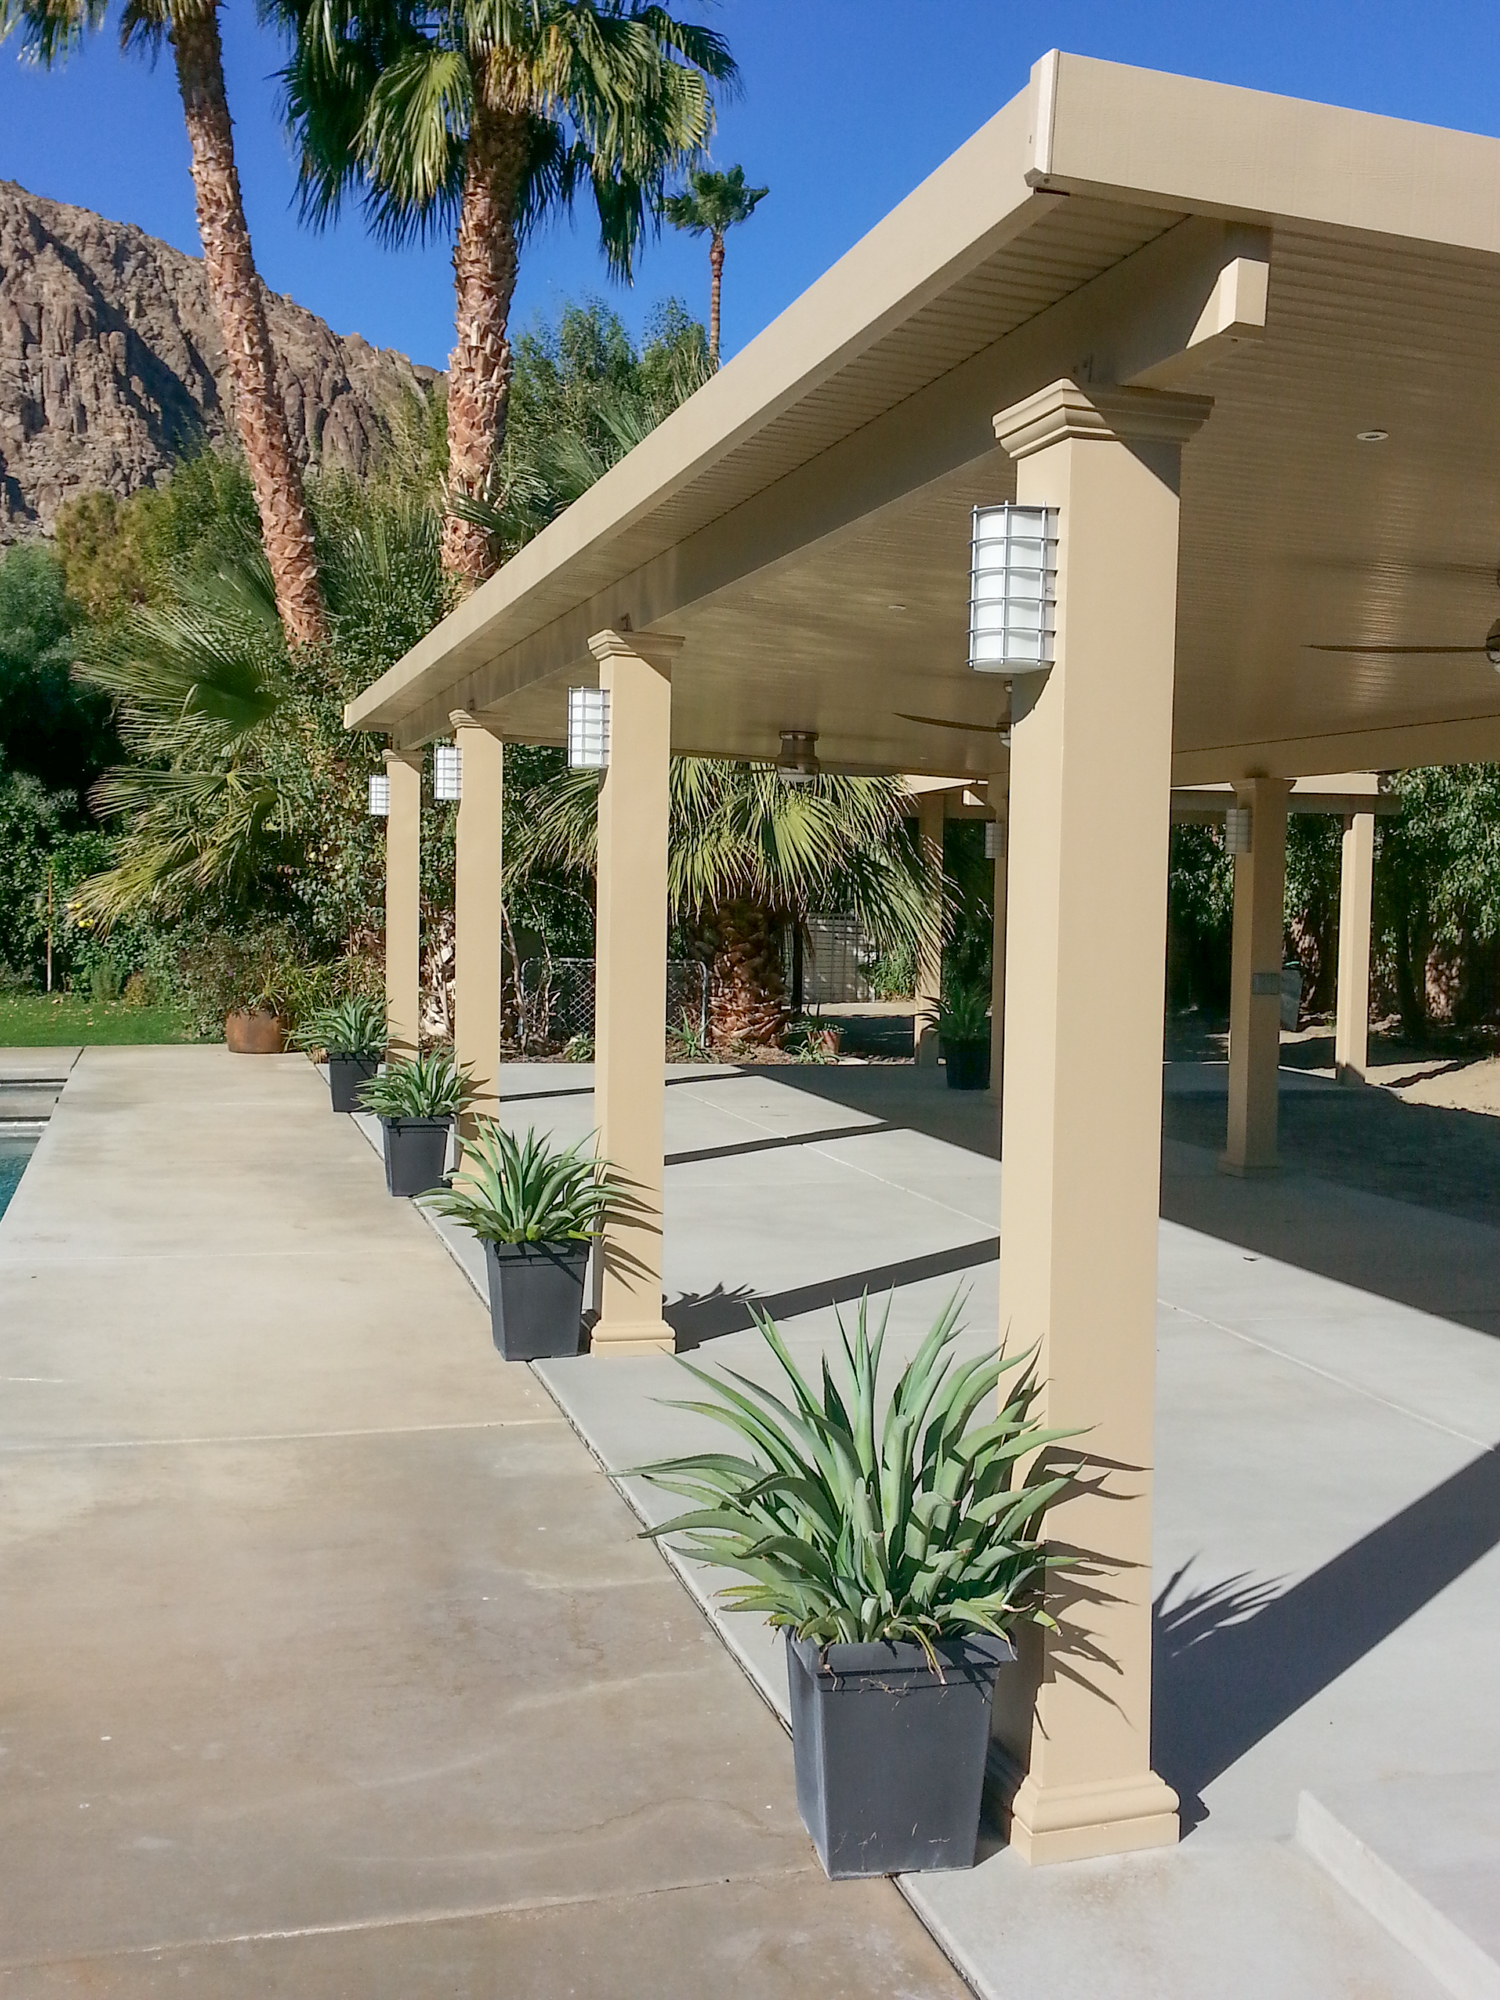 Custom Light Fixtures on Solid Patio Cover, Indio, CA 